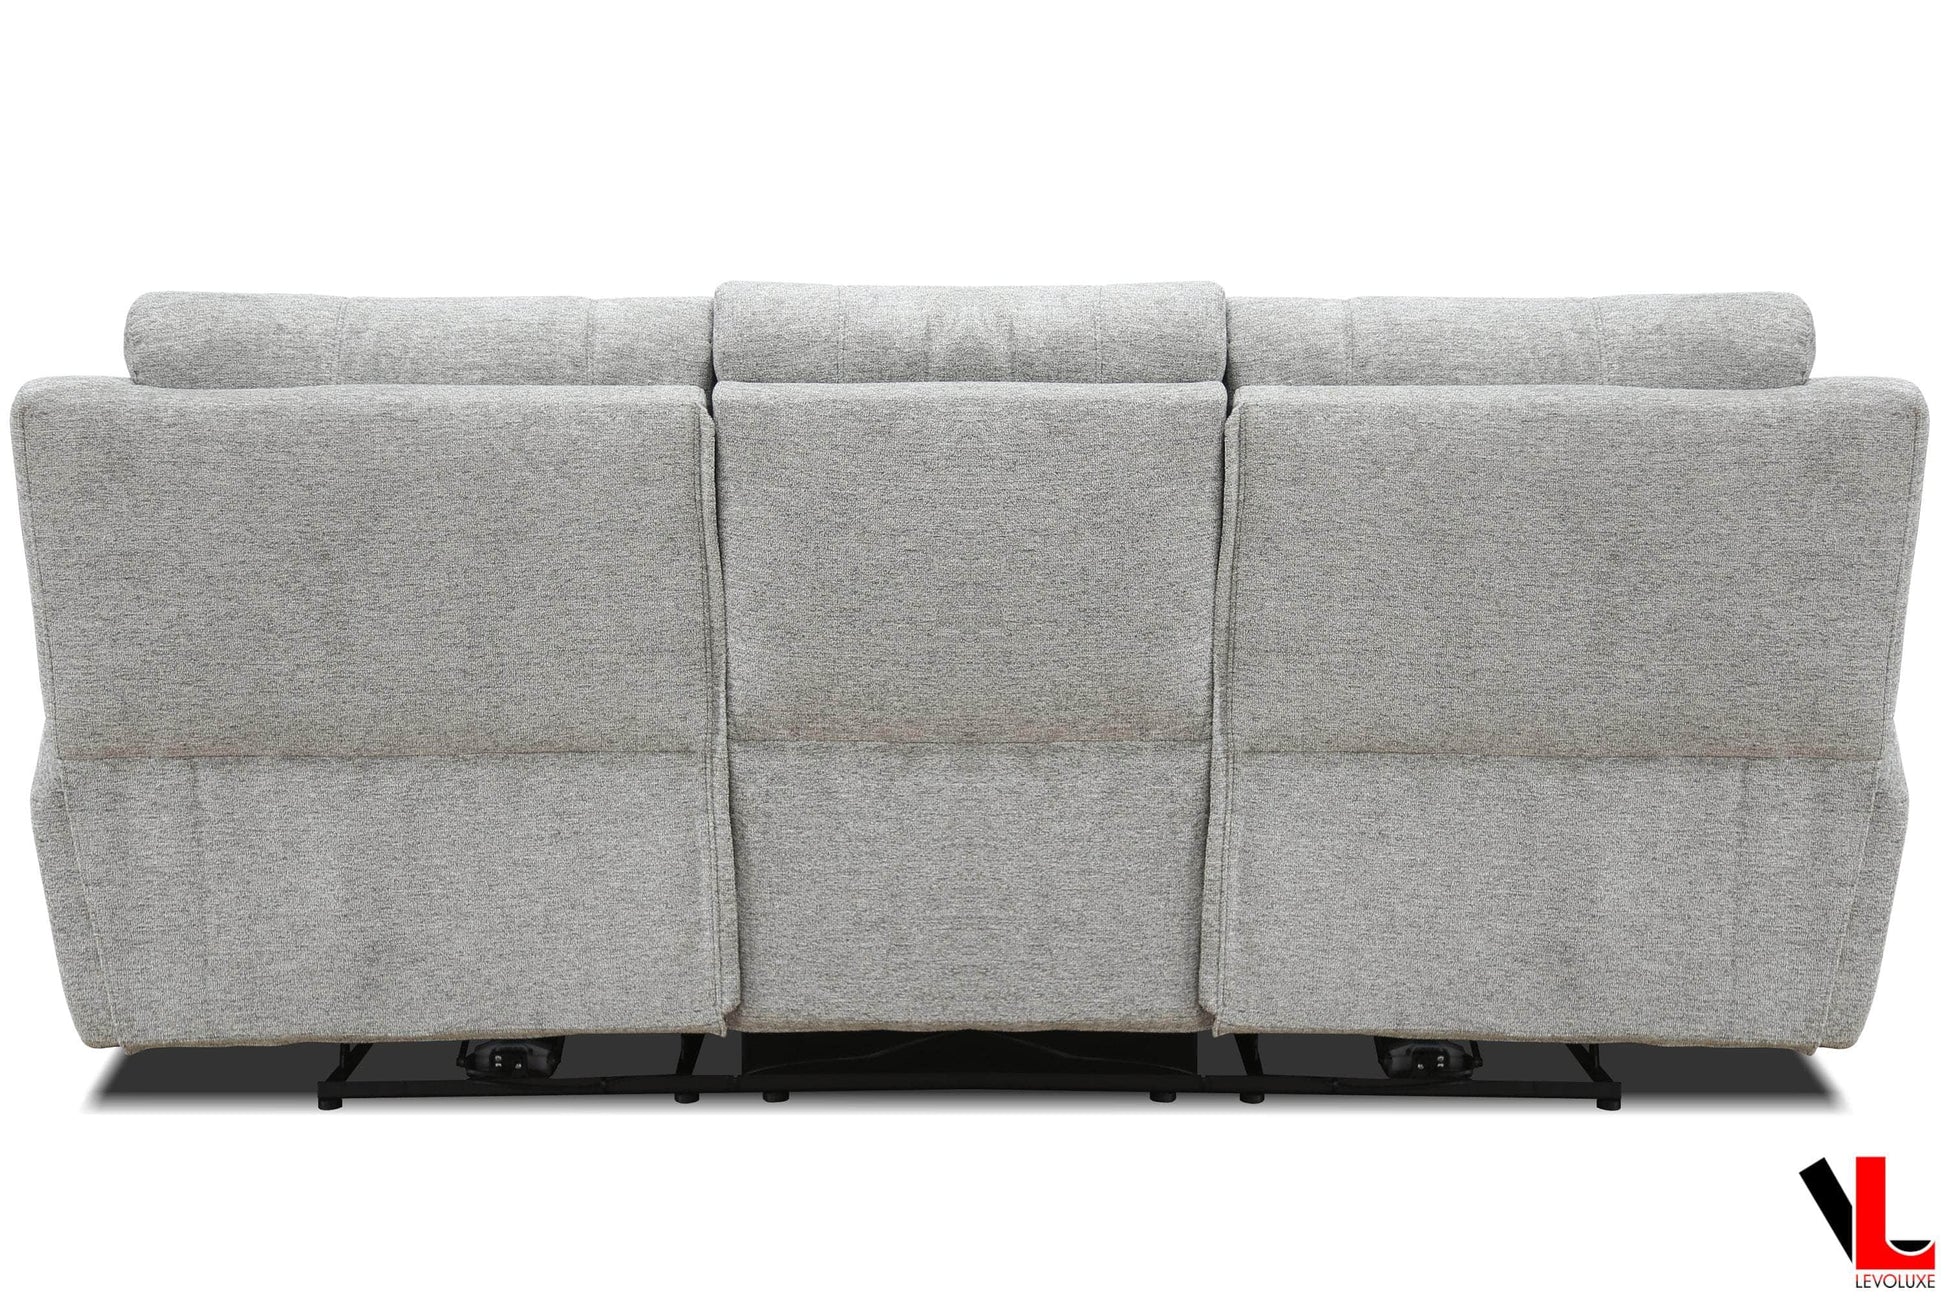 Pending - Levoluxe Sentinel 3 Piece Power Reclining Sofa, Loveseat and Chair Set with Power Headrest in Tweed Ash Fabric